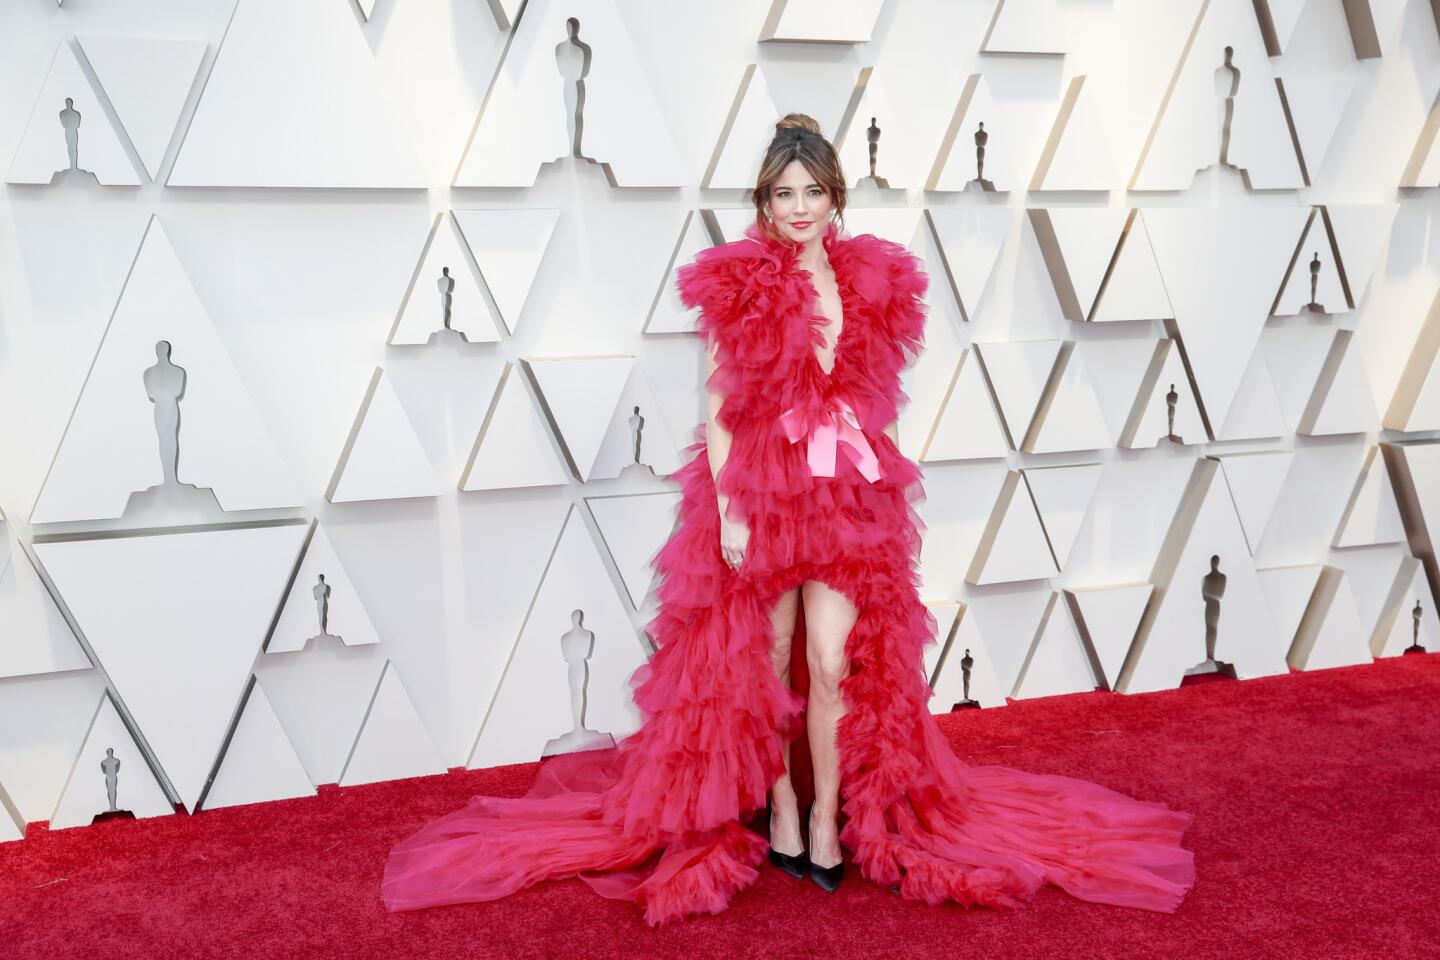 MISS: Linda Cardellini looks like a nightgown nightmare in this ruffled red high-low gown by Schiaparelli.